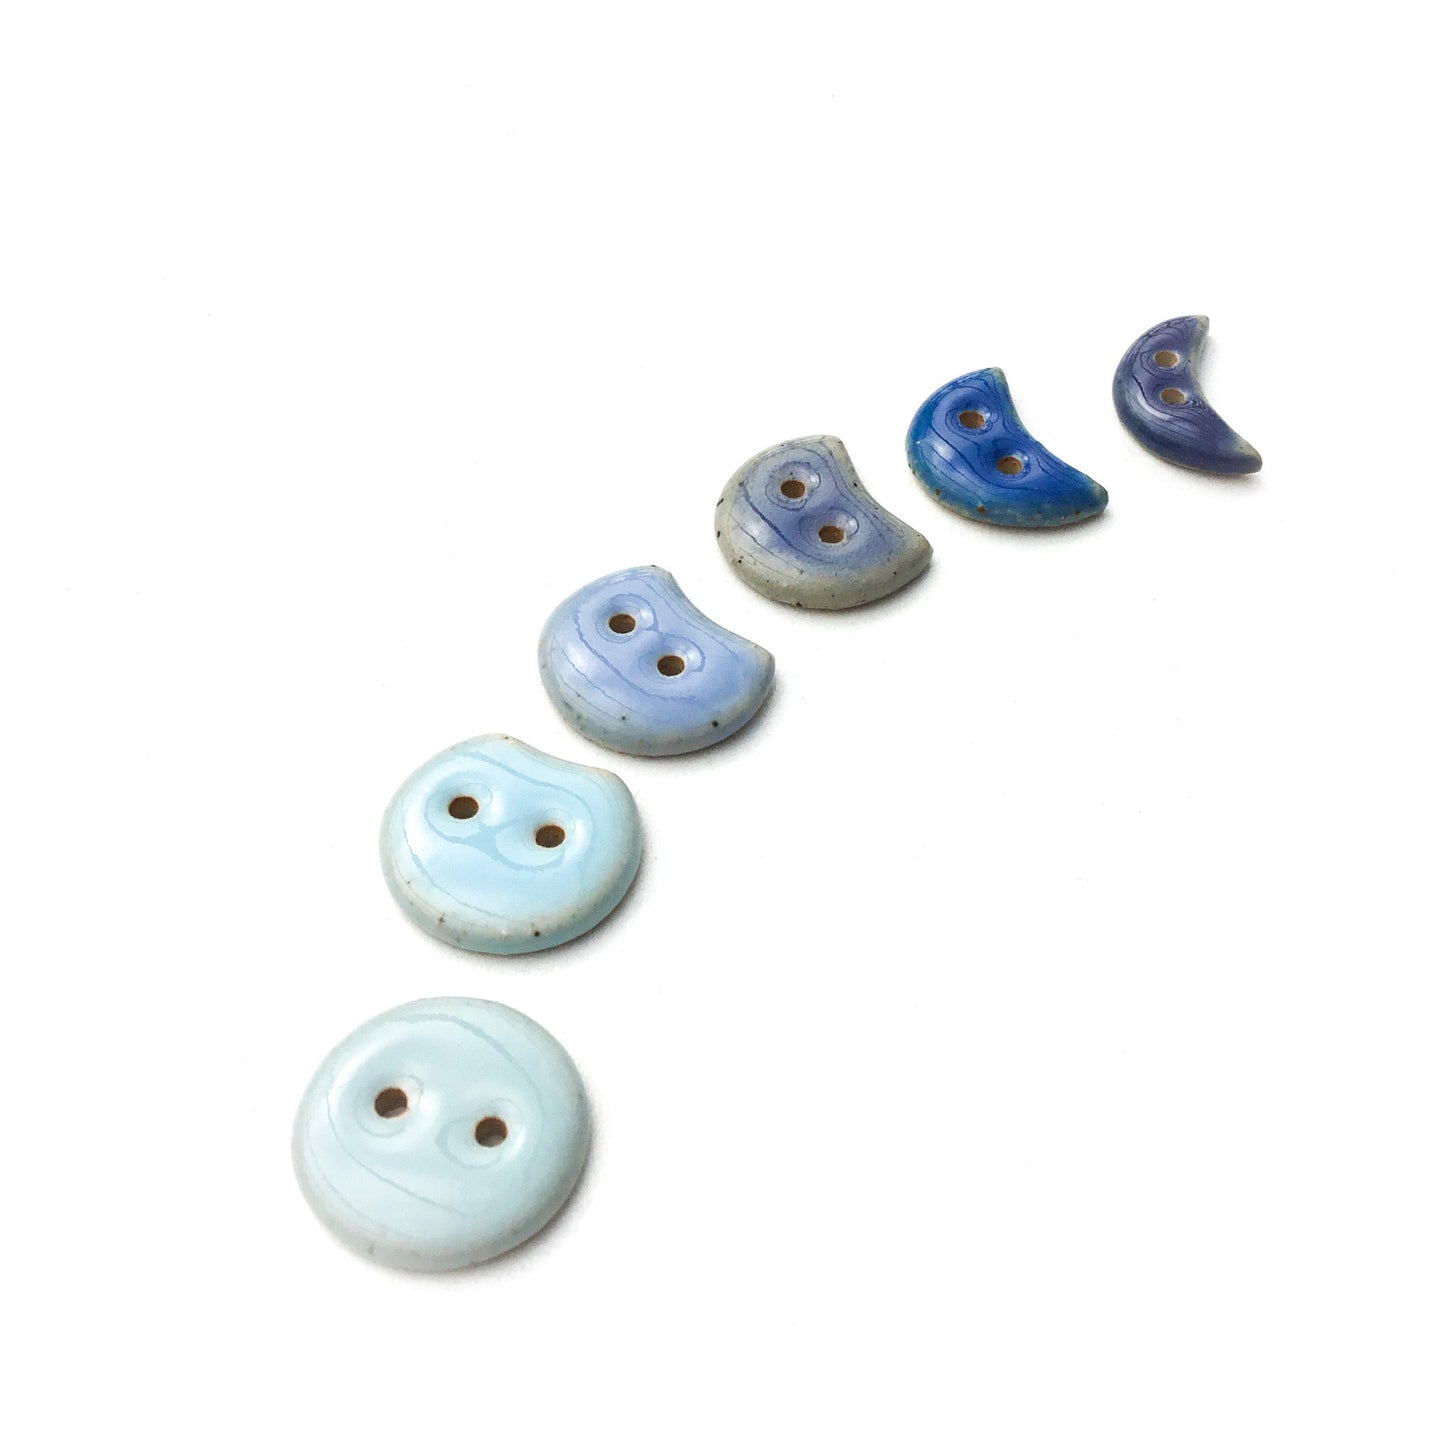 Blue Moon Phase Ceramic Buttons - 3/4" - 6 Pack